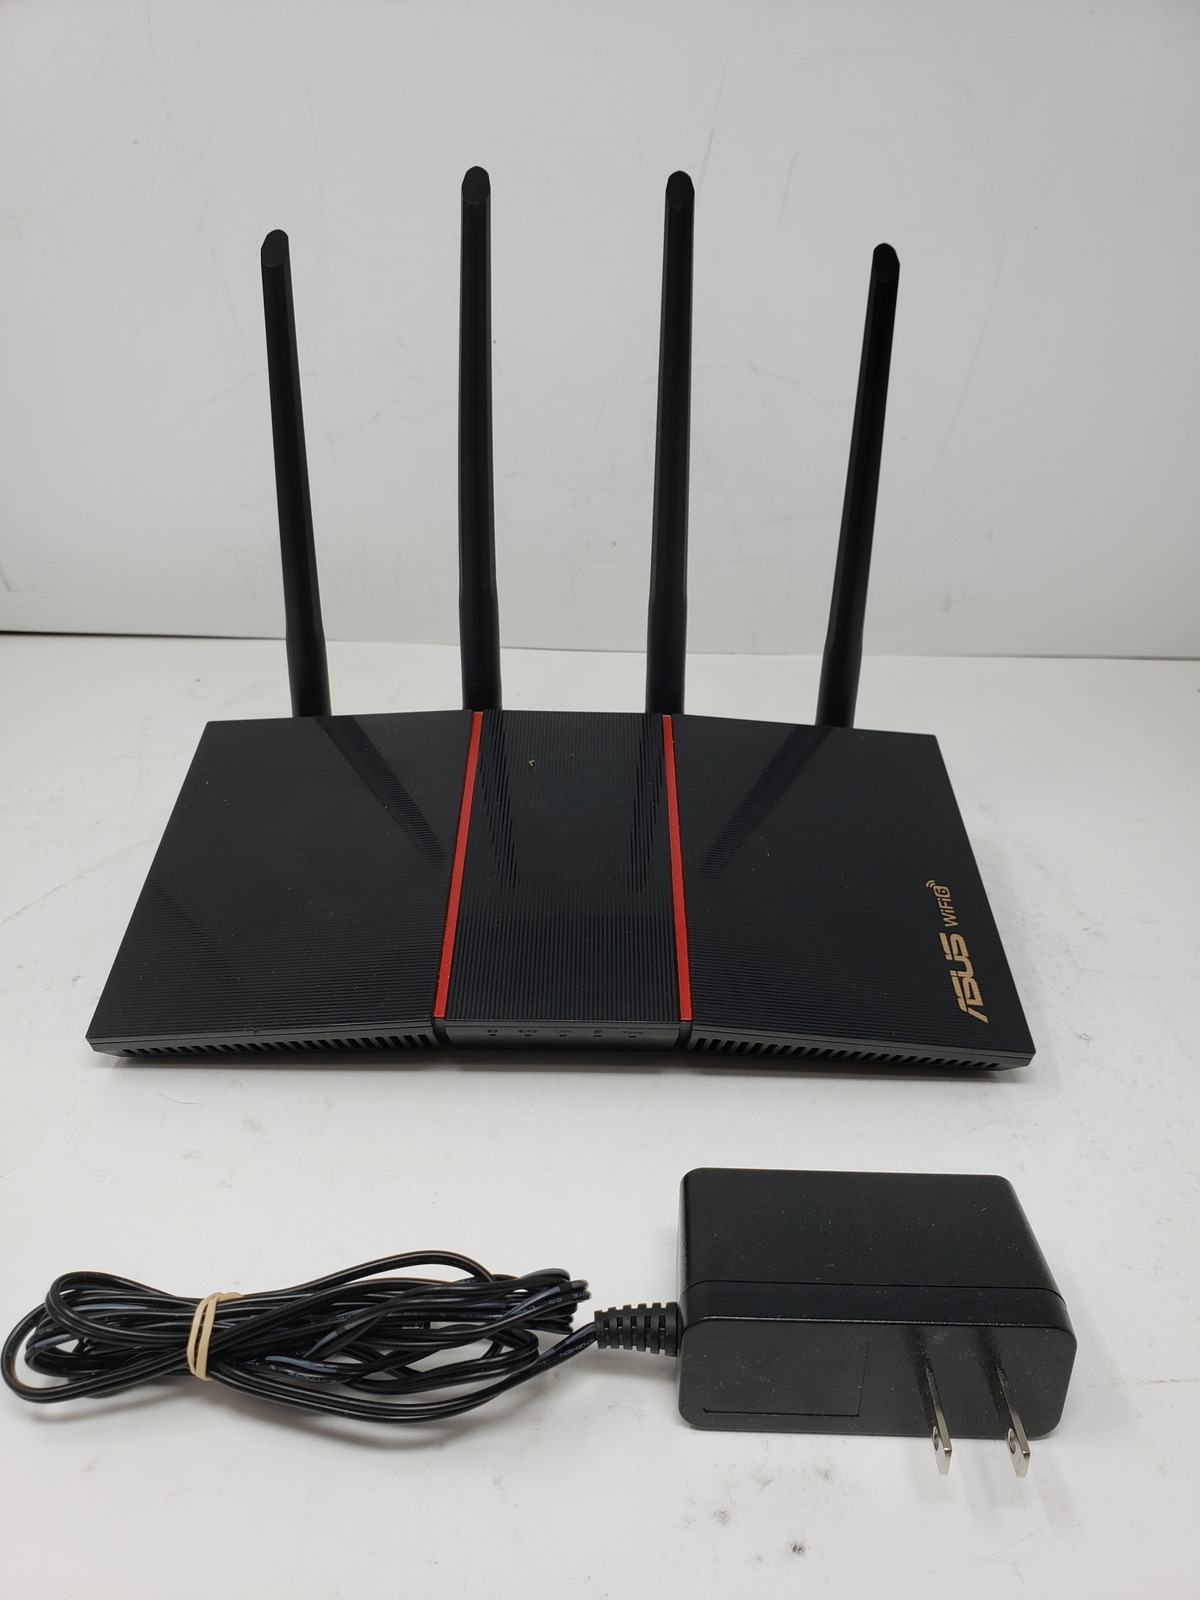 ASUS AX1800 WiFi 6 Router RT-AX55 Dual Band Gigabit Wireless Router  (R2)